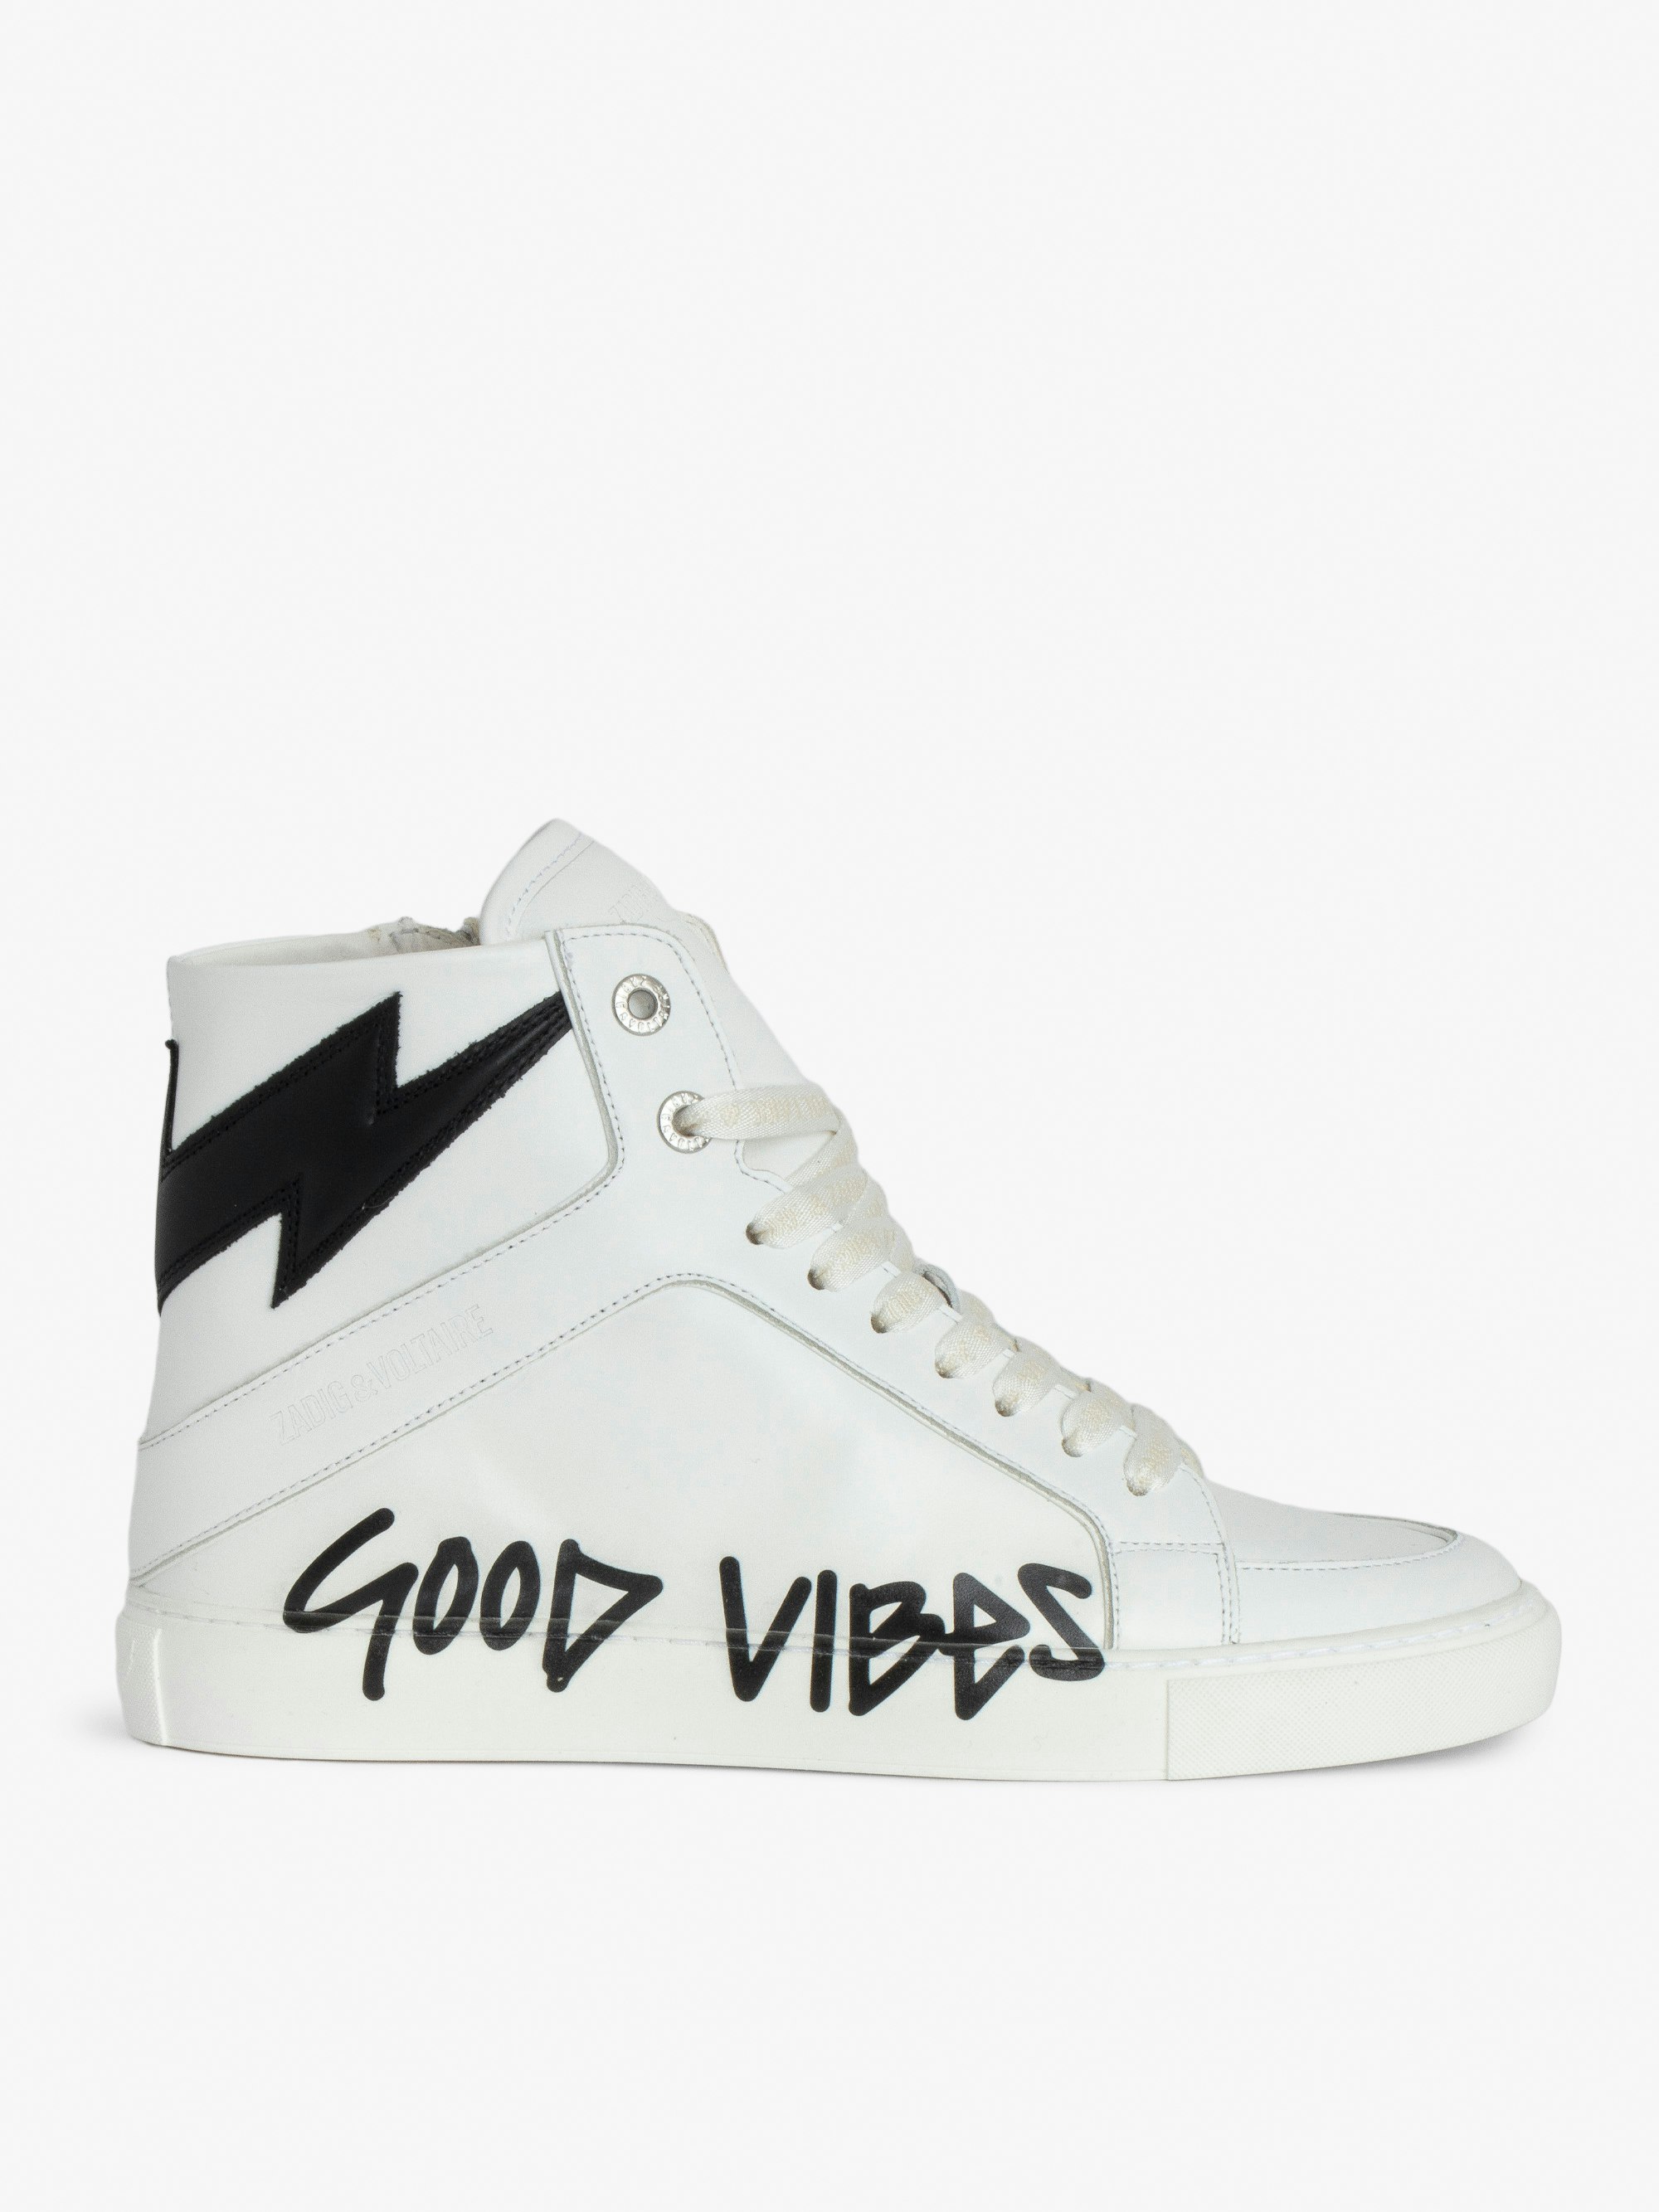 ZV1747 High Flash Good Vibes Sneakers - Women’s white leather high-top sneakers with black flash and "Good Vibes" print on side panel.